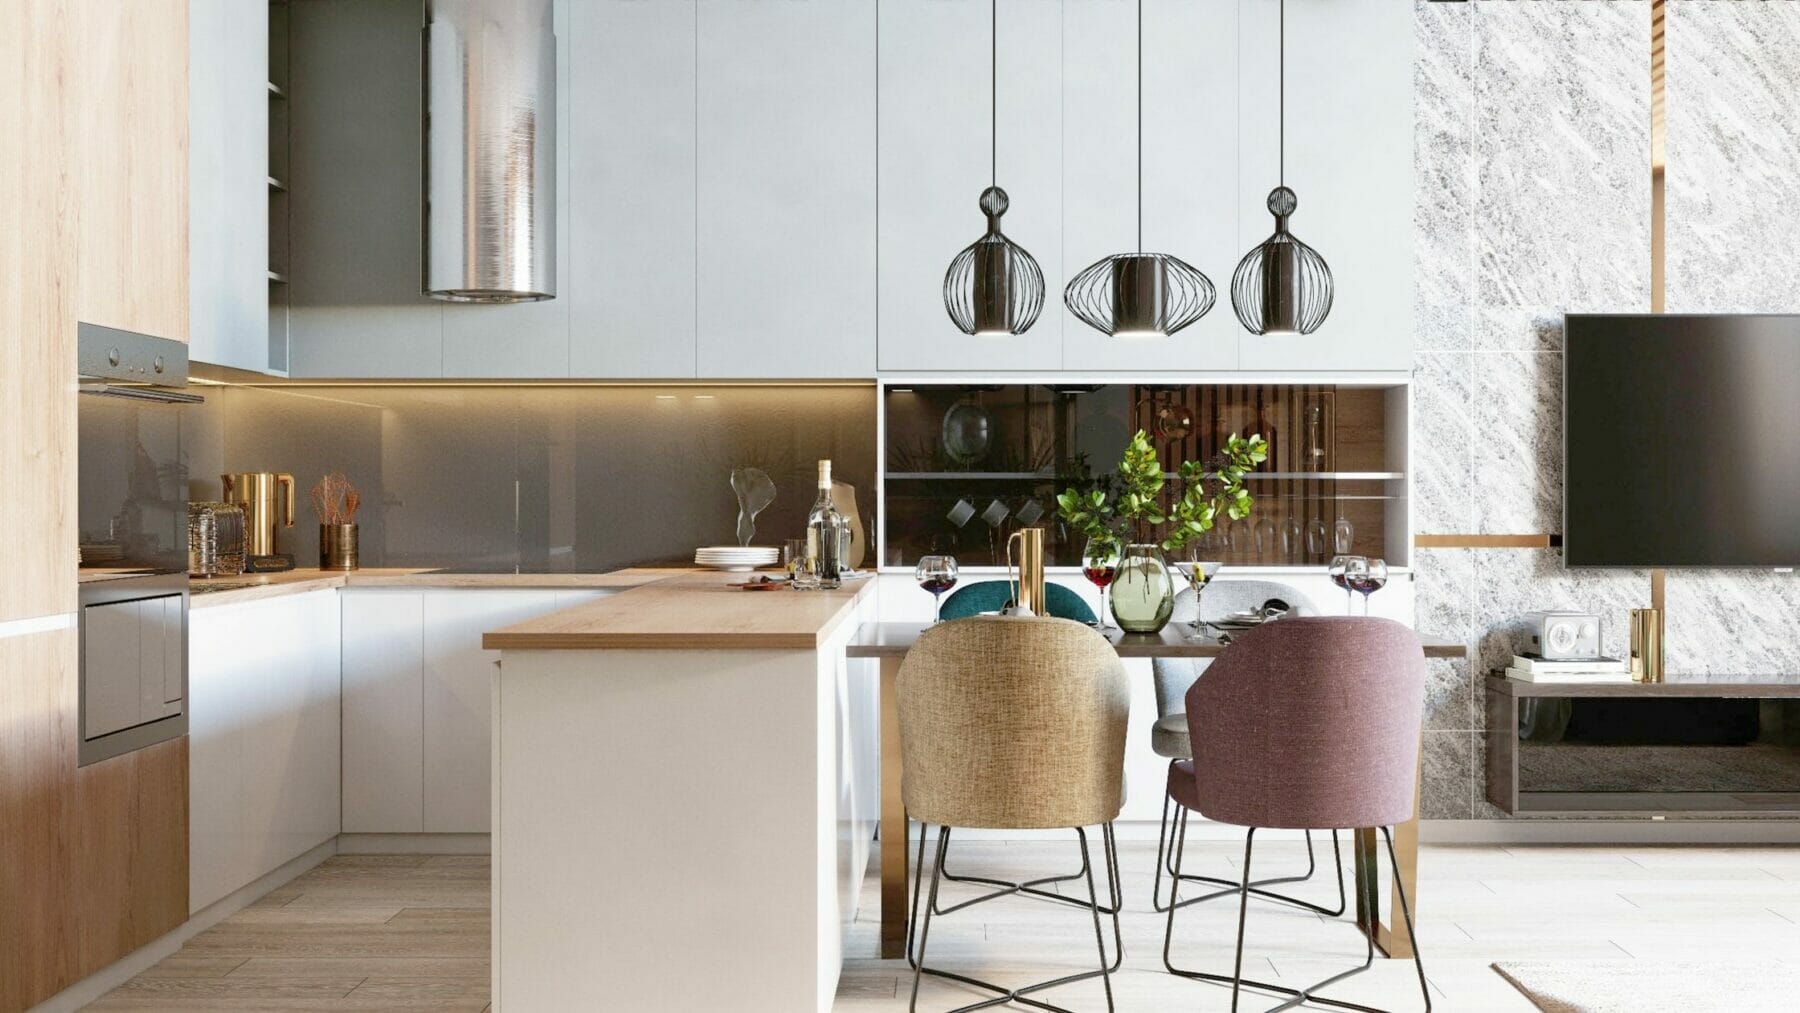 Modern home kitchen, renovated by eco-friendly means.